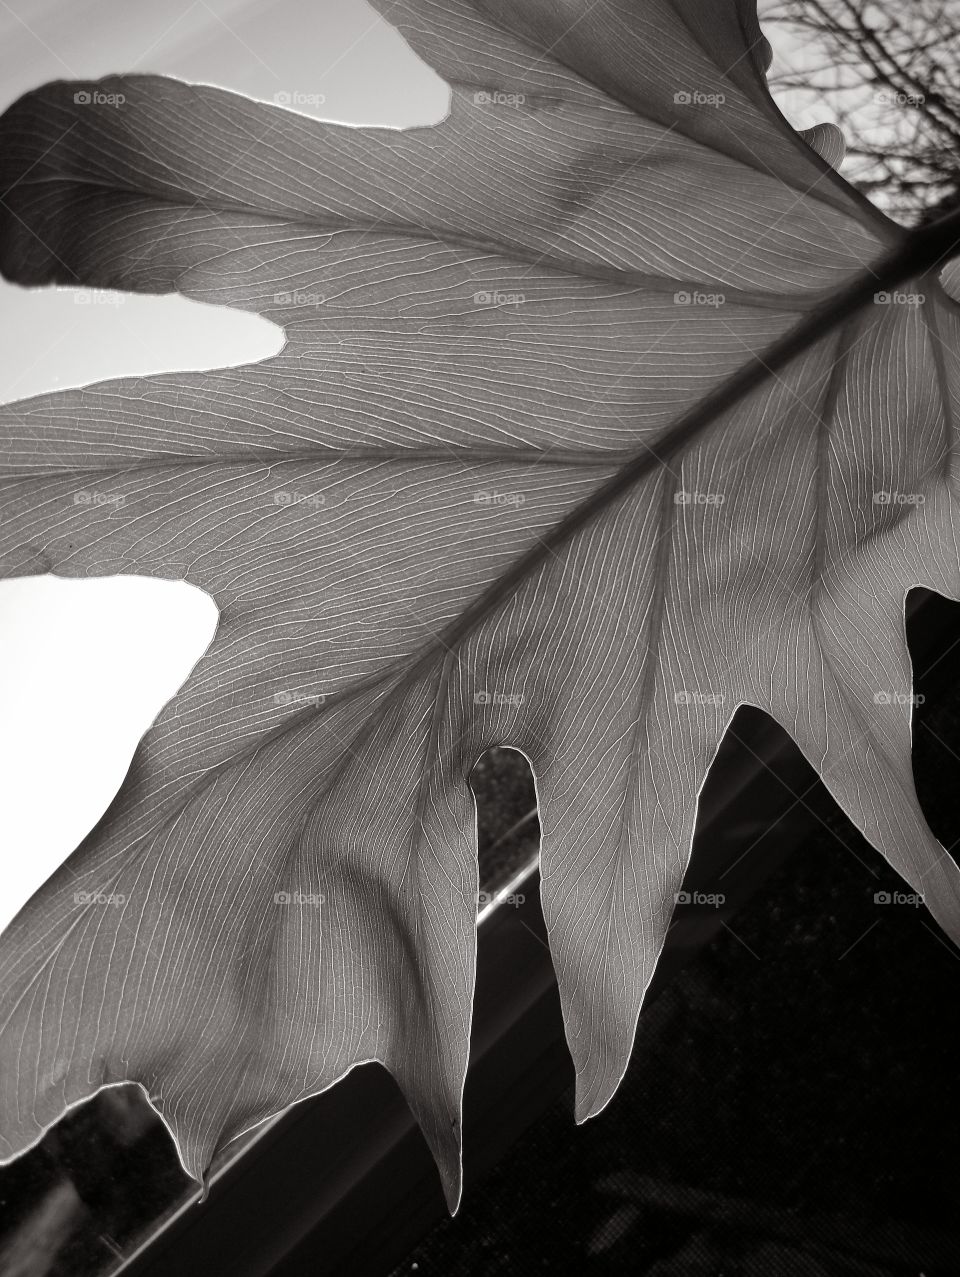 black and white closeup philodendron leaf showing light and veins through the leaf